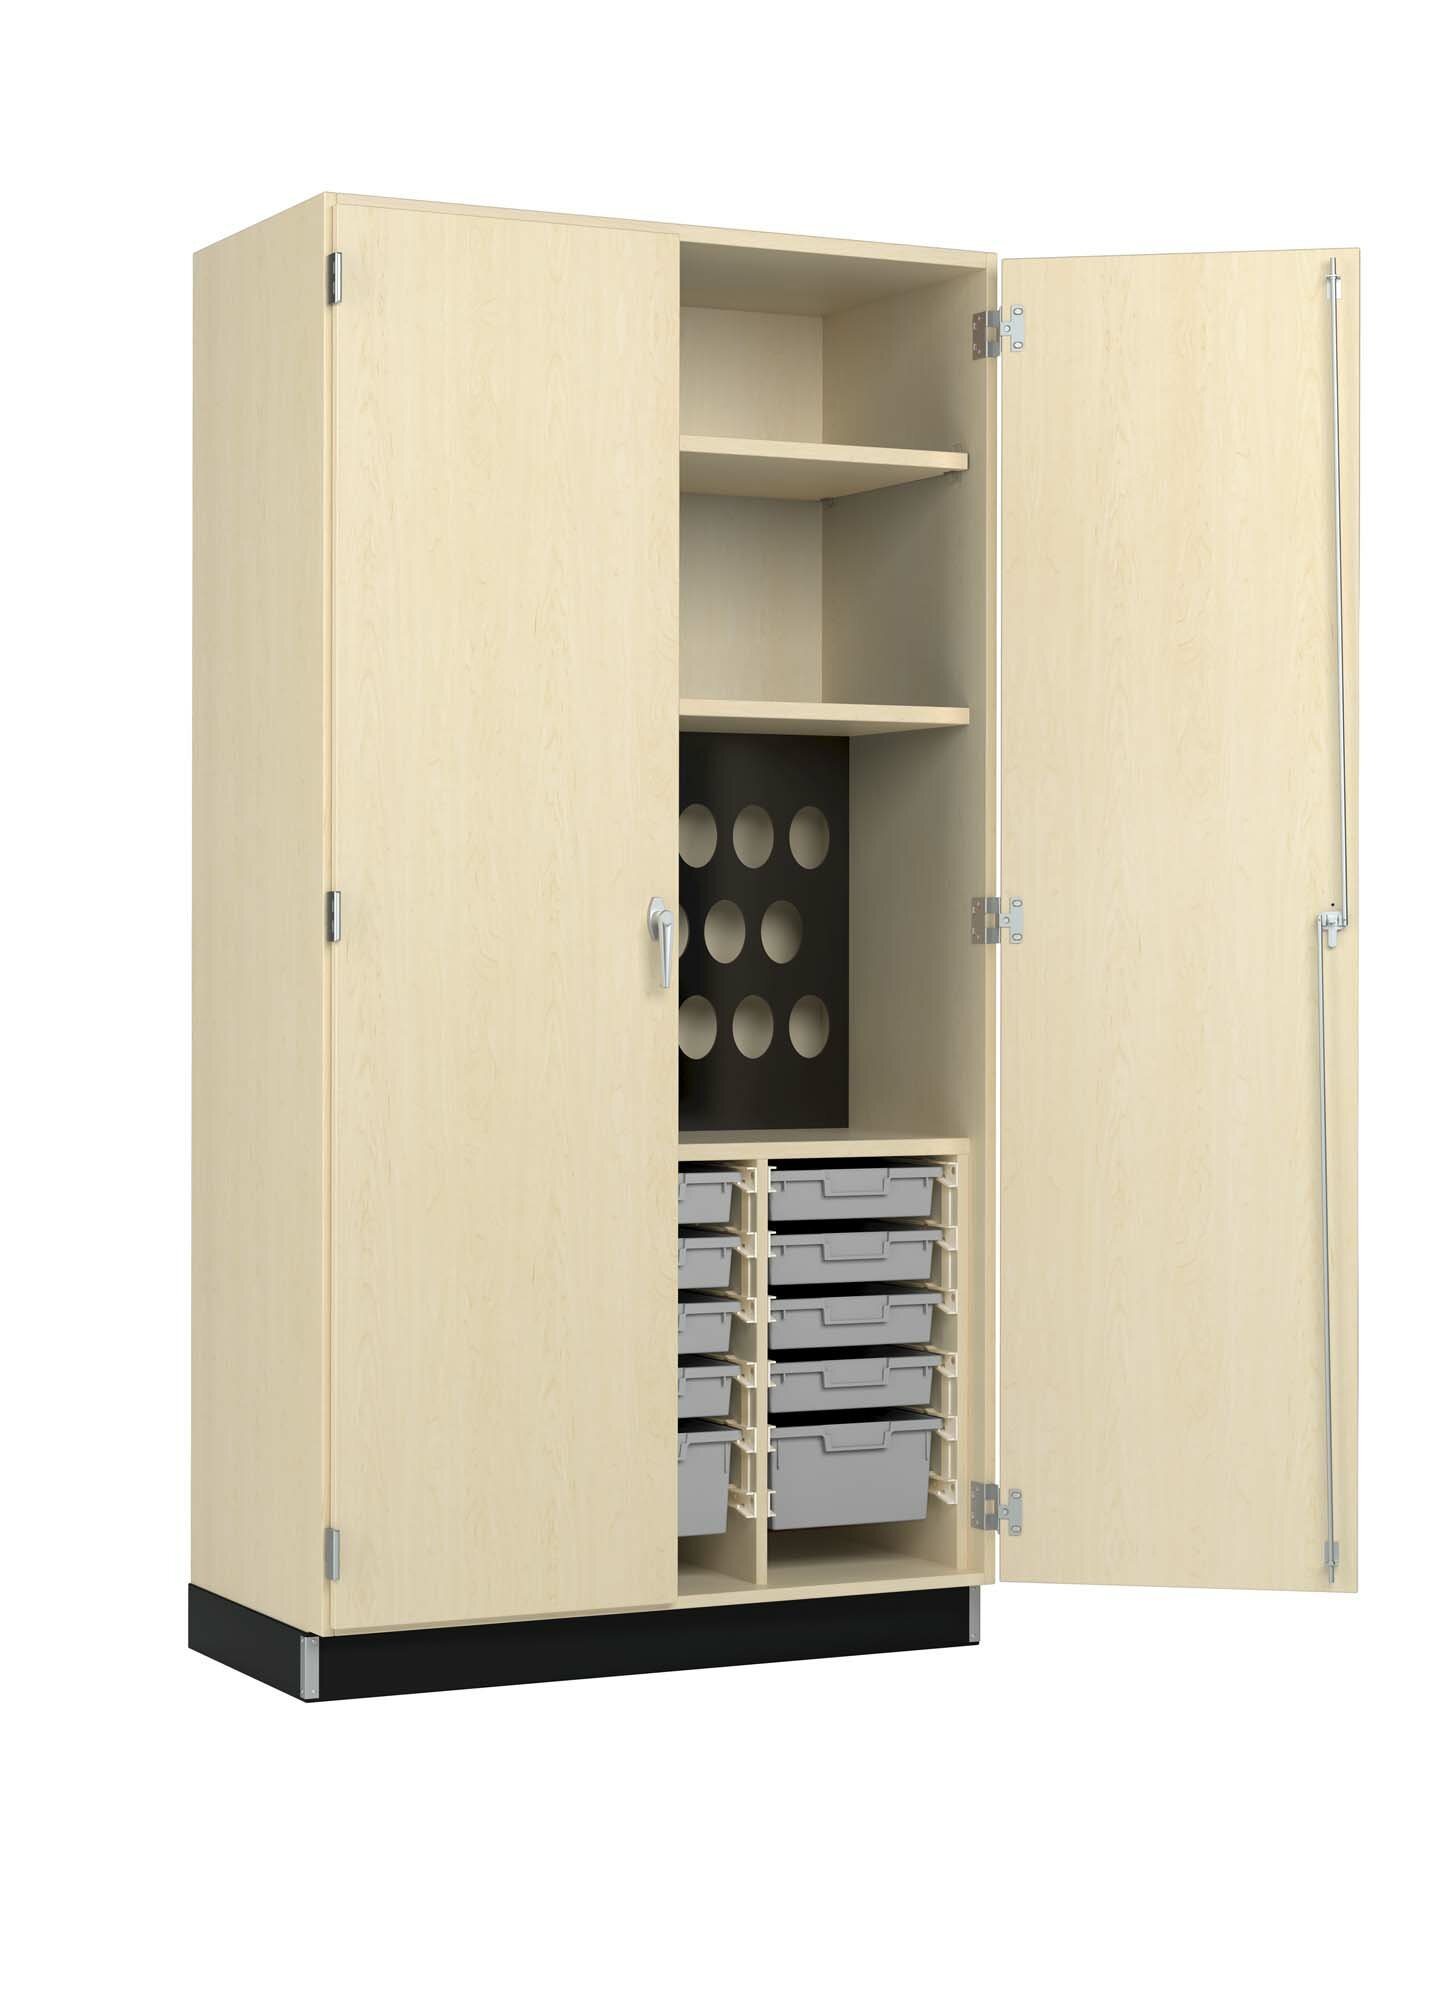 Art Supply Cabinet  Furniture projects, Woodworking furniture